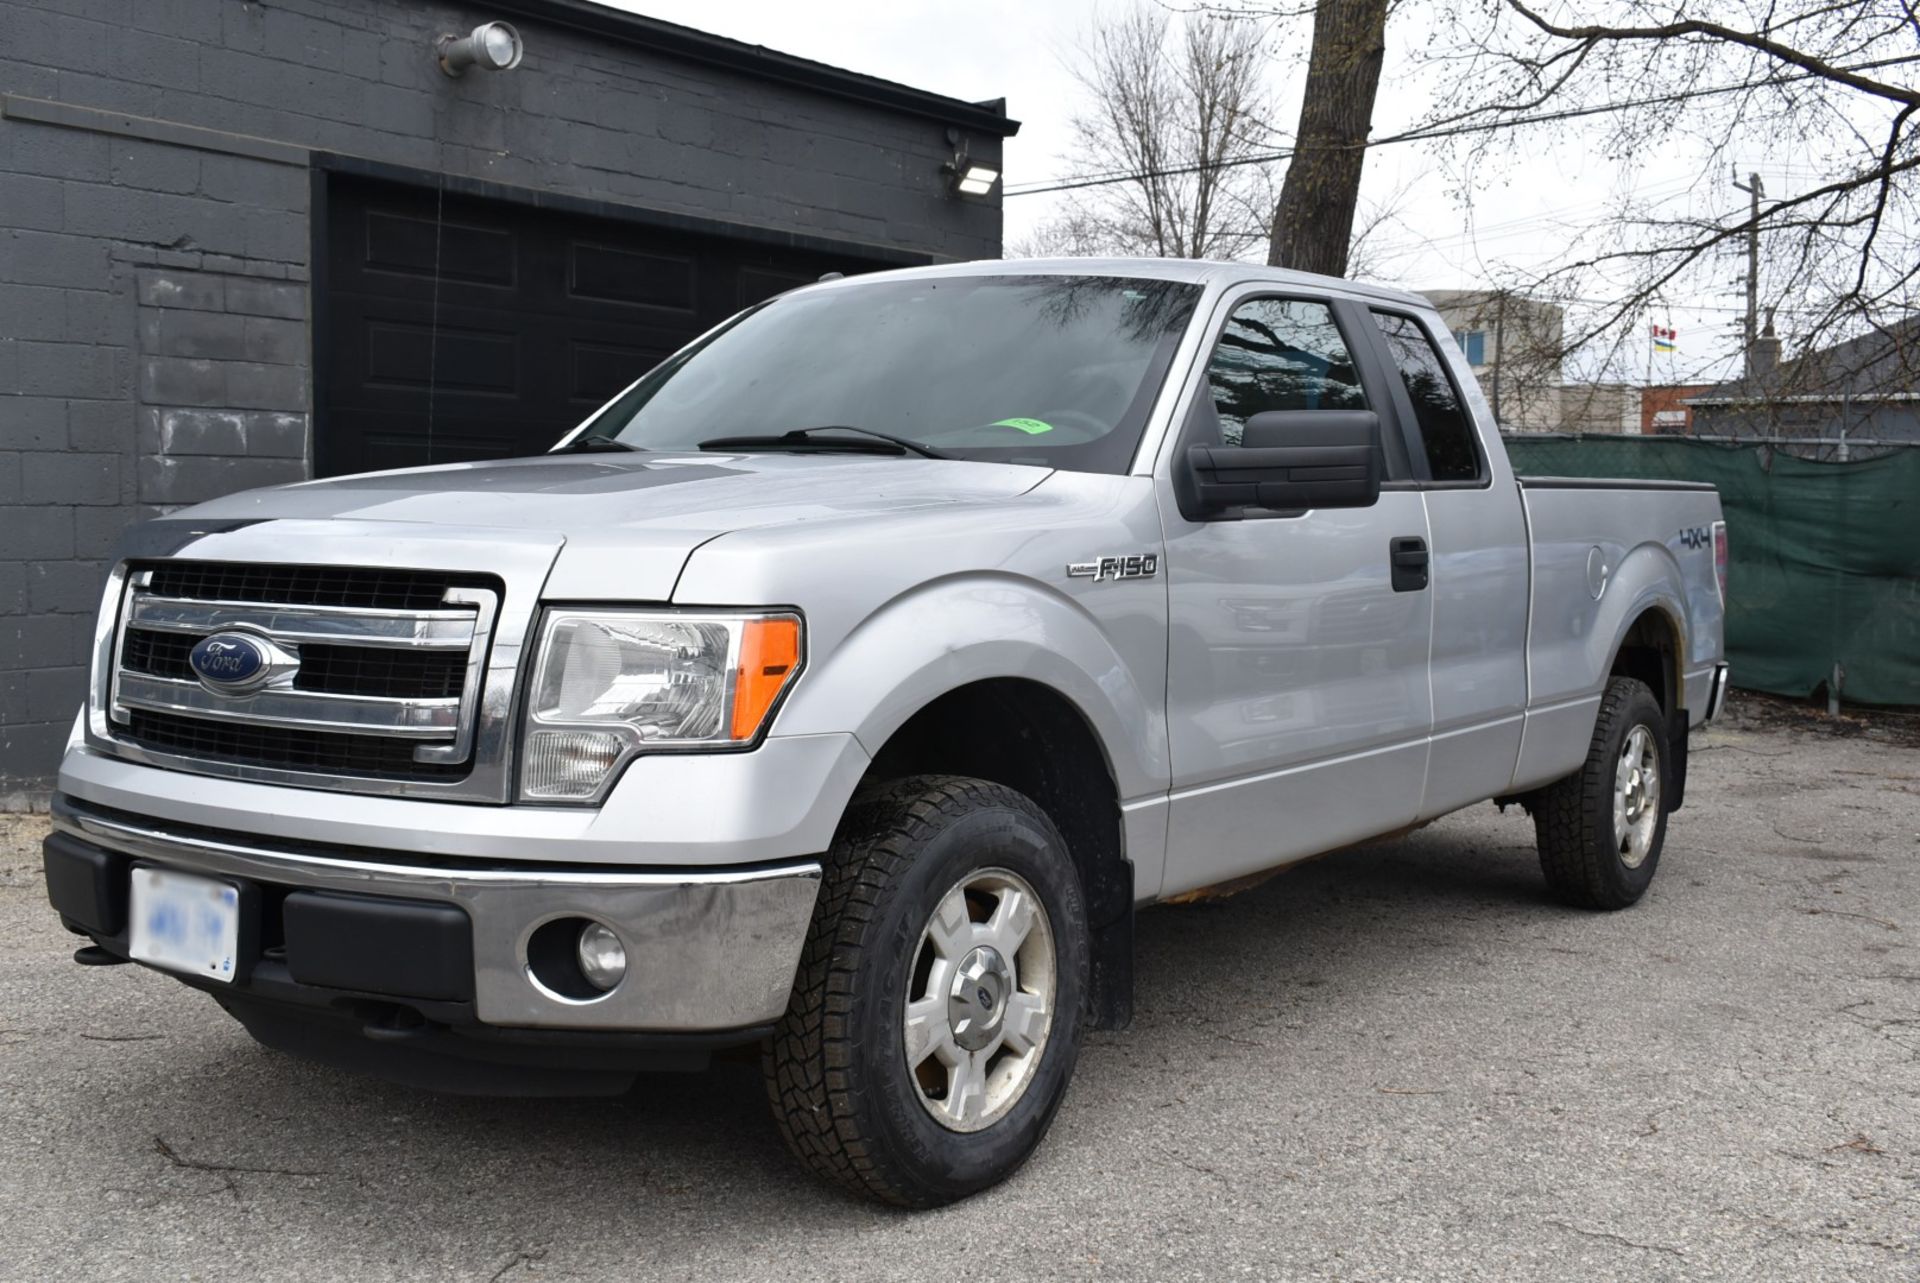 FORD (2014) F150XLT EXTENDED CAB PICKUP TRUCK WITH 3.7 LITER V6 ENGINE, 4X4, AUTO TRANSMISSION,